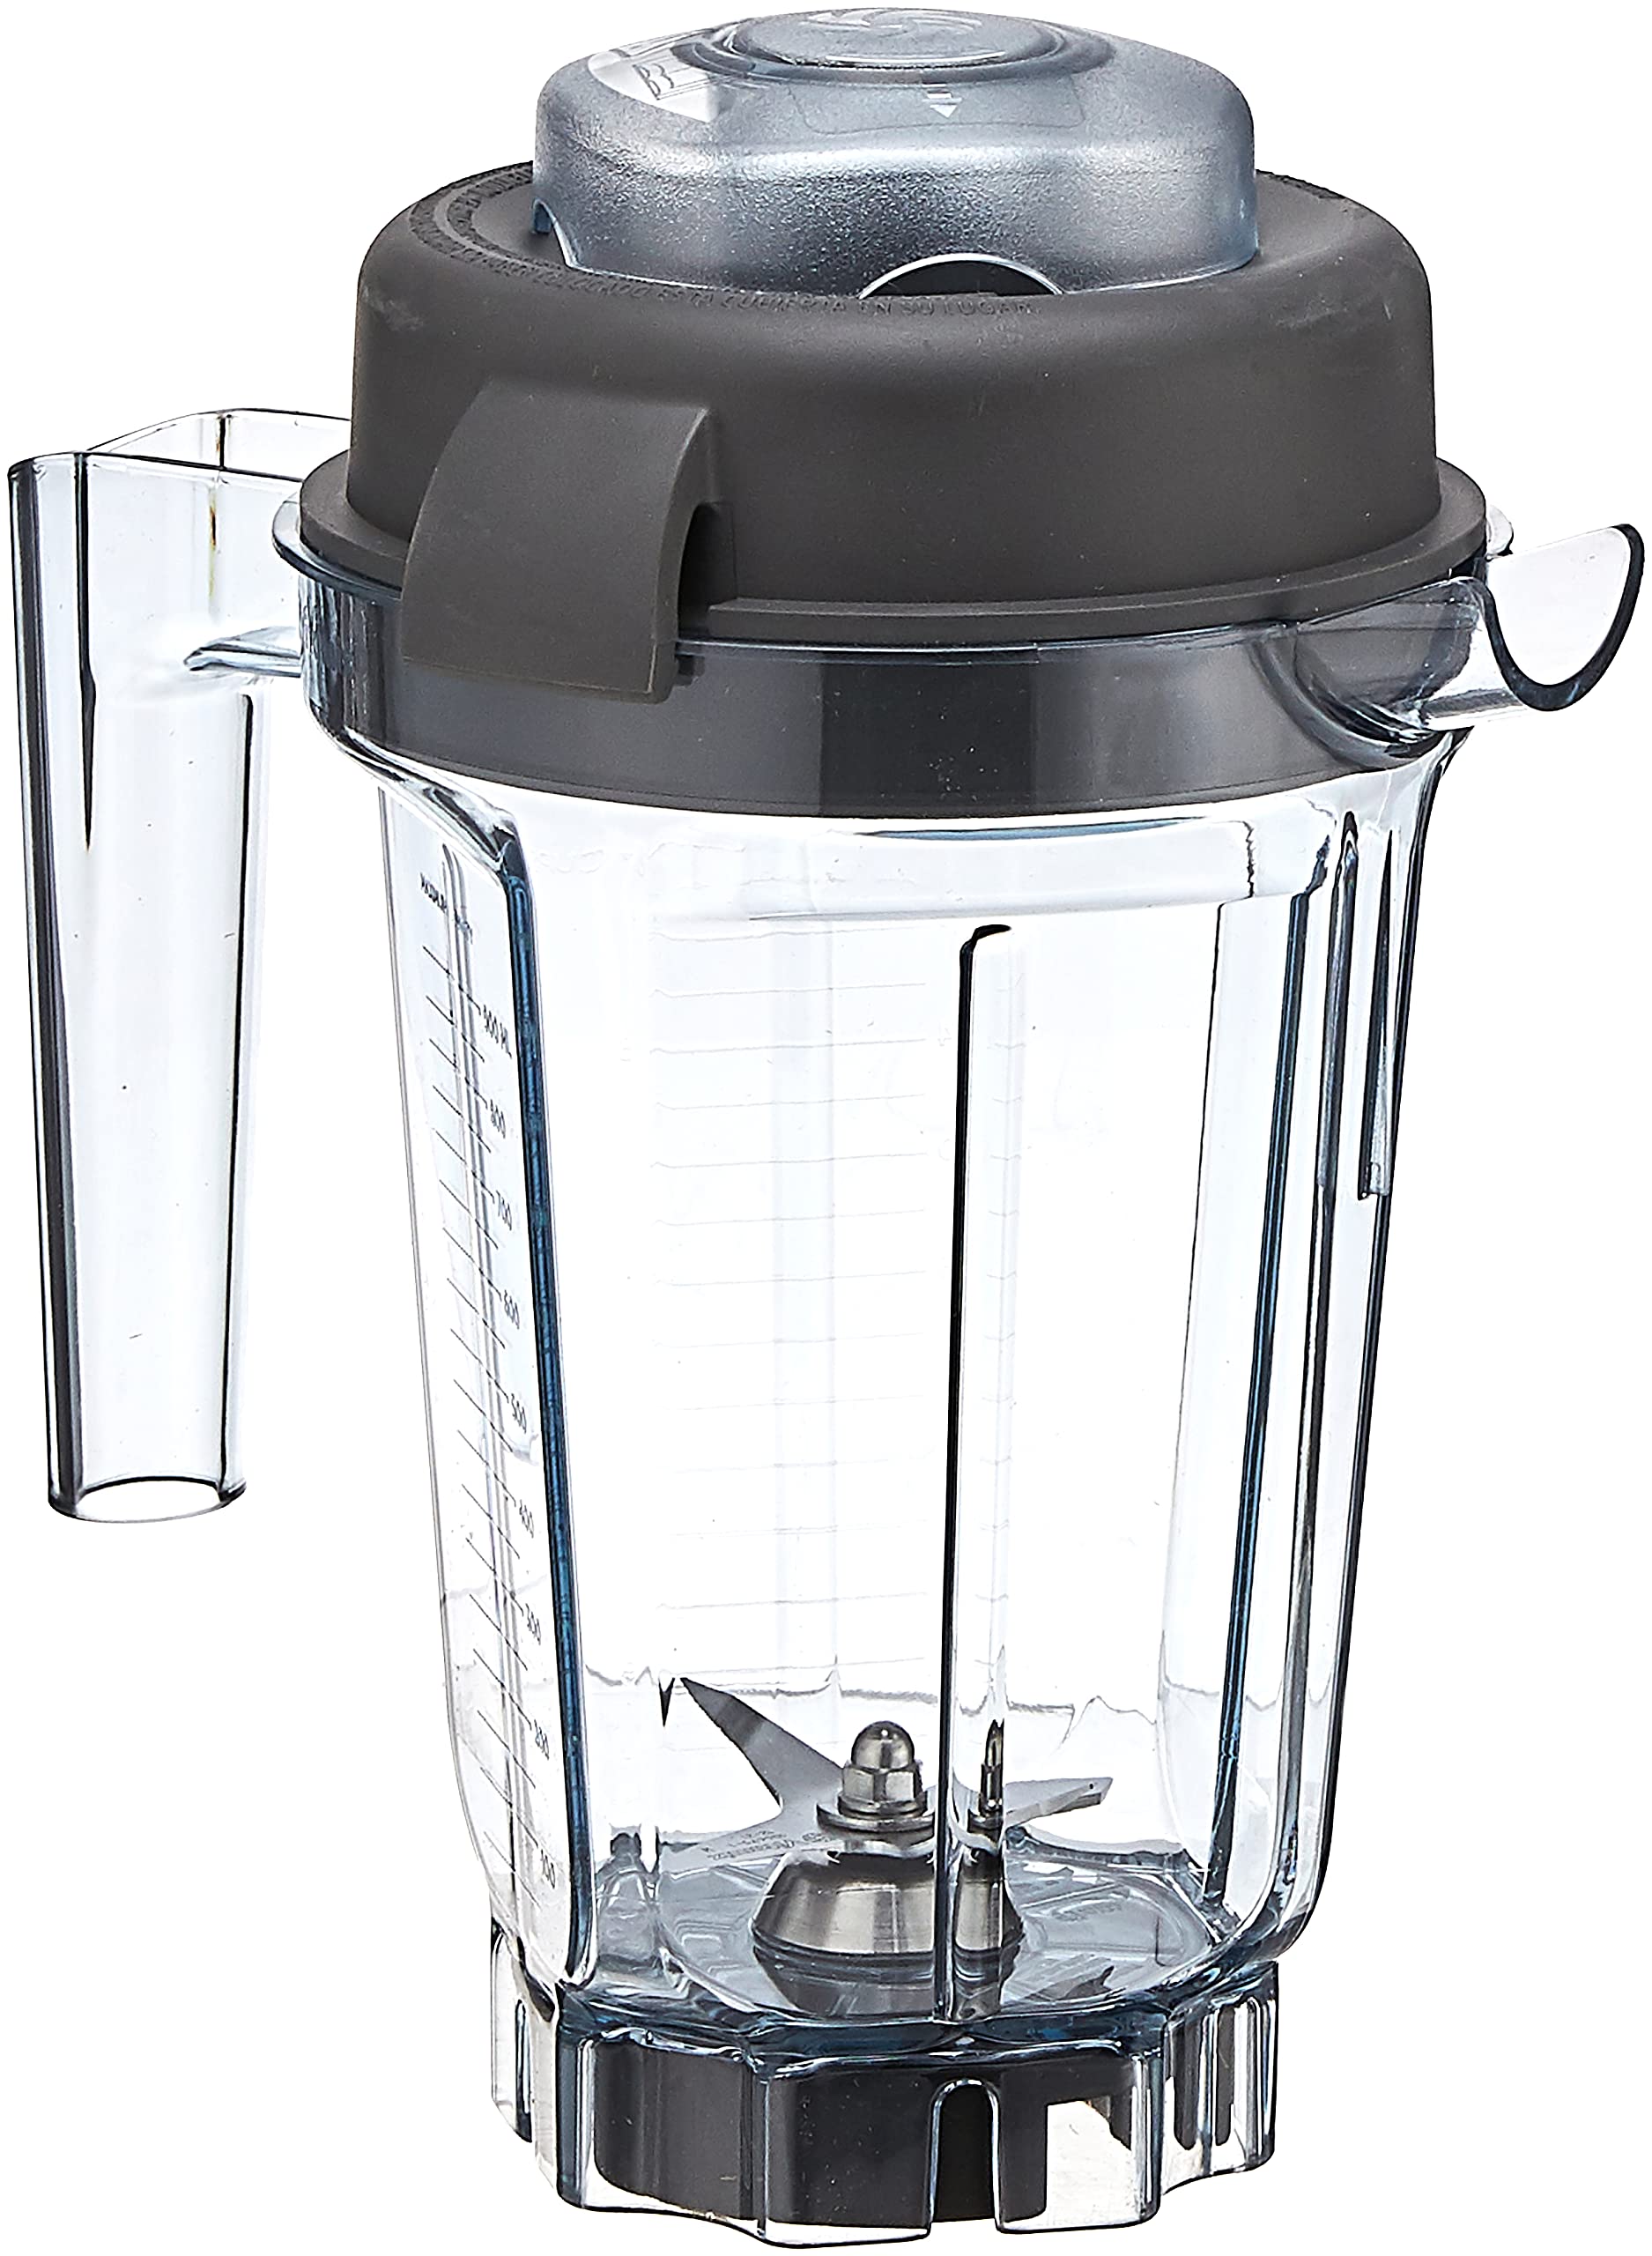 Vitamix 15842 Container, 32 Ounce, Clear (Tamper Not Included)